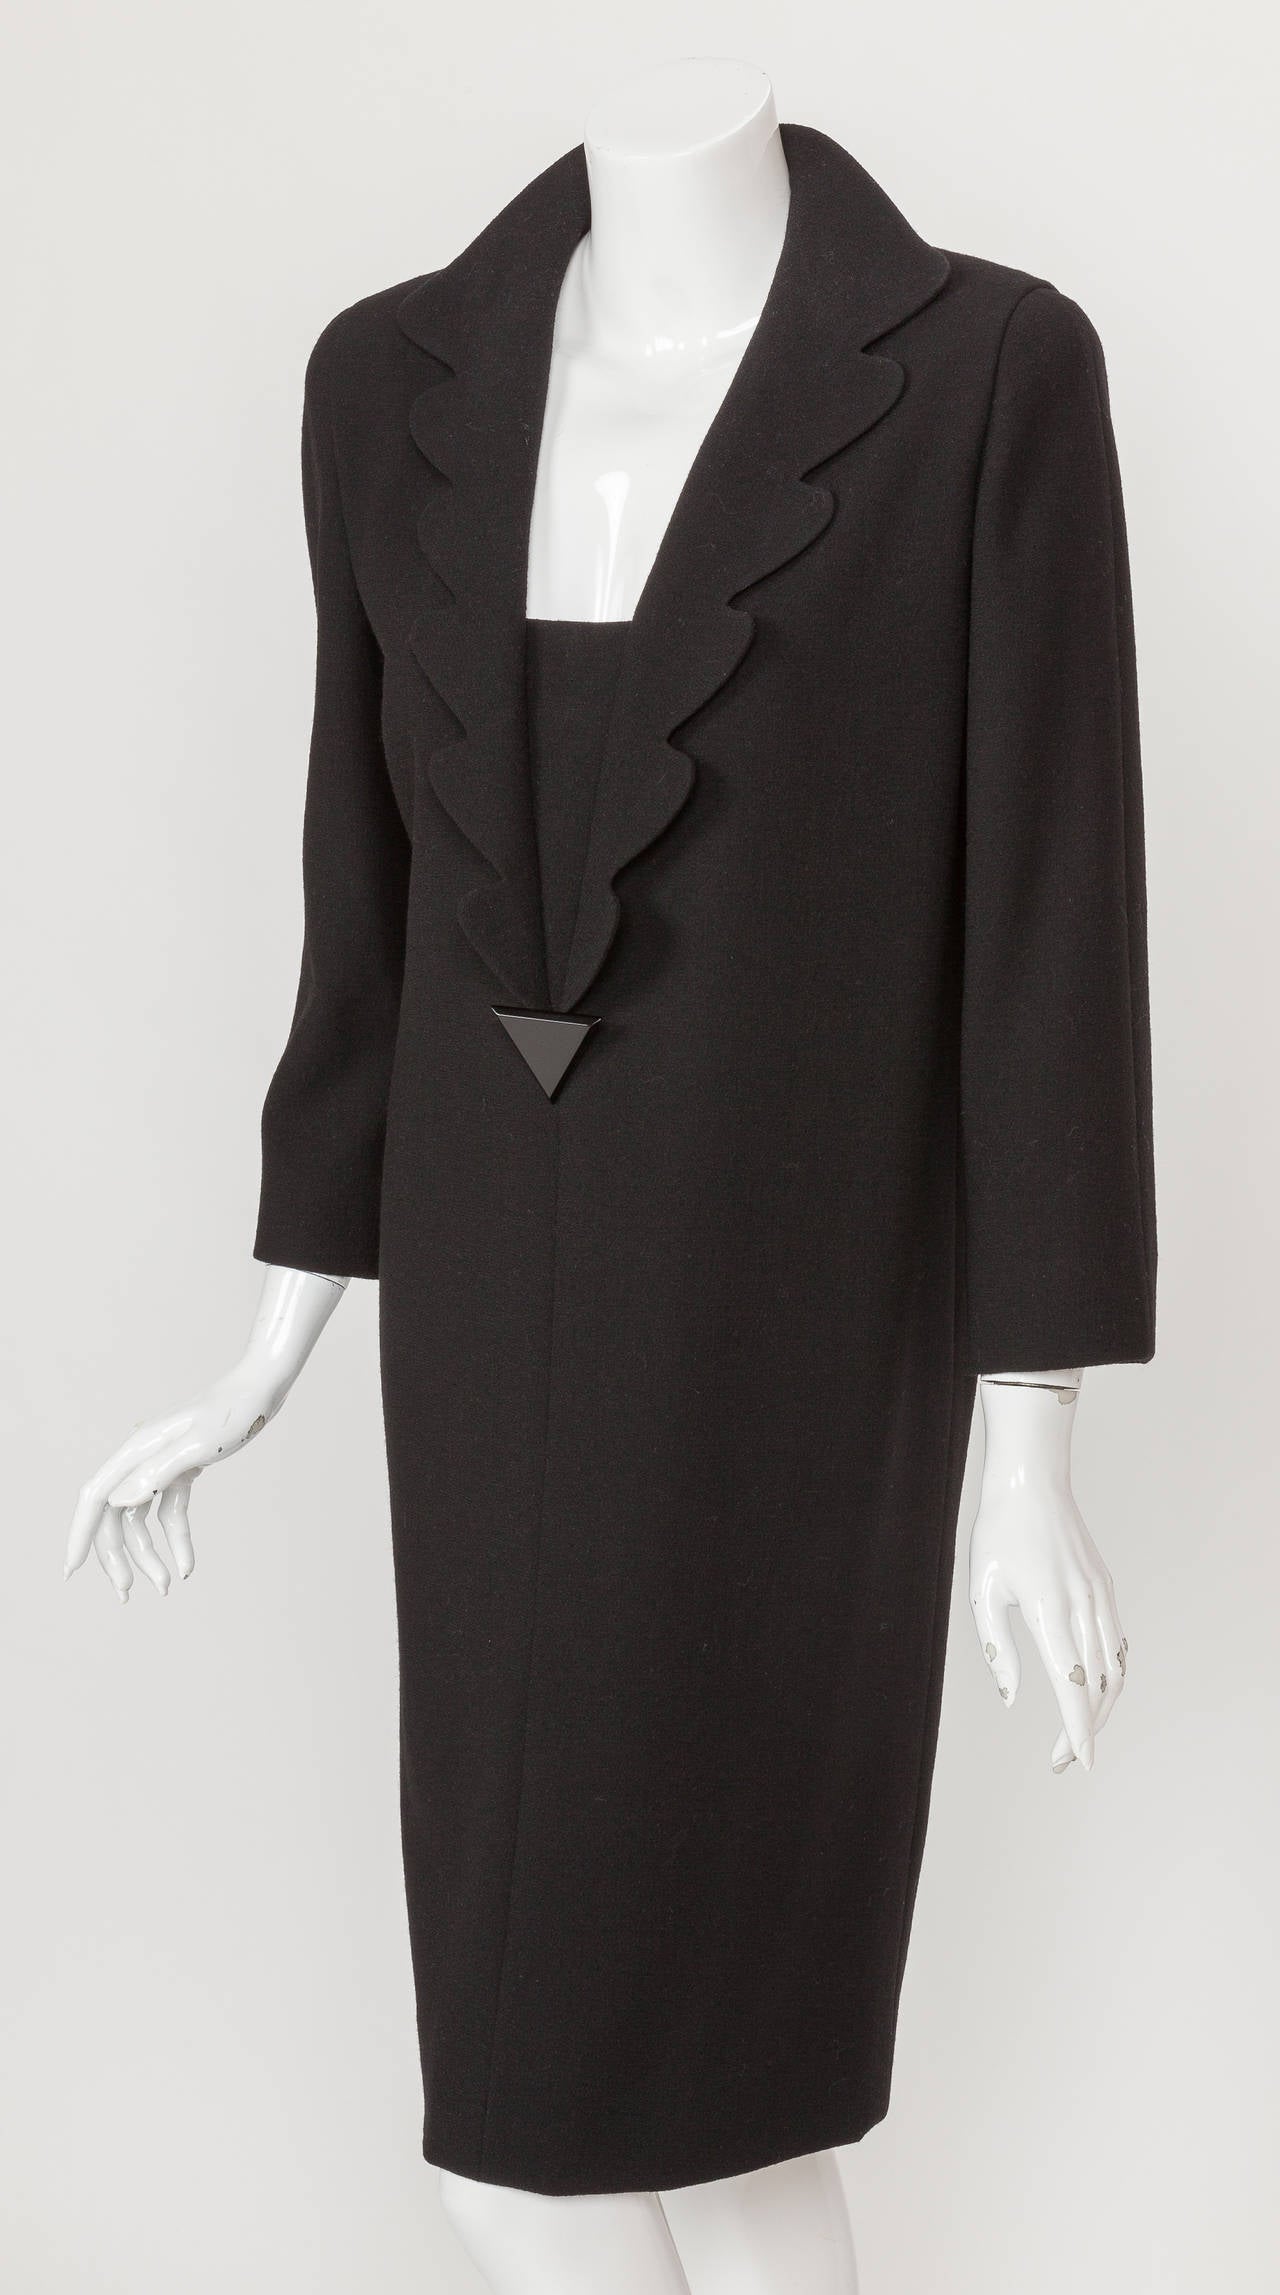 A circa 1992 Pierre Cardin haute couture black wool crepe cocktail dress. This sophisticated cocktail dress features a long petalled lapel and is ornamented with an upside down triangle-shaped black button. The silhouette features a subtly tapered